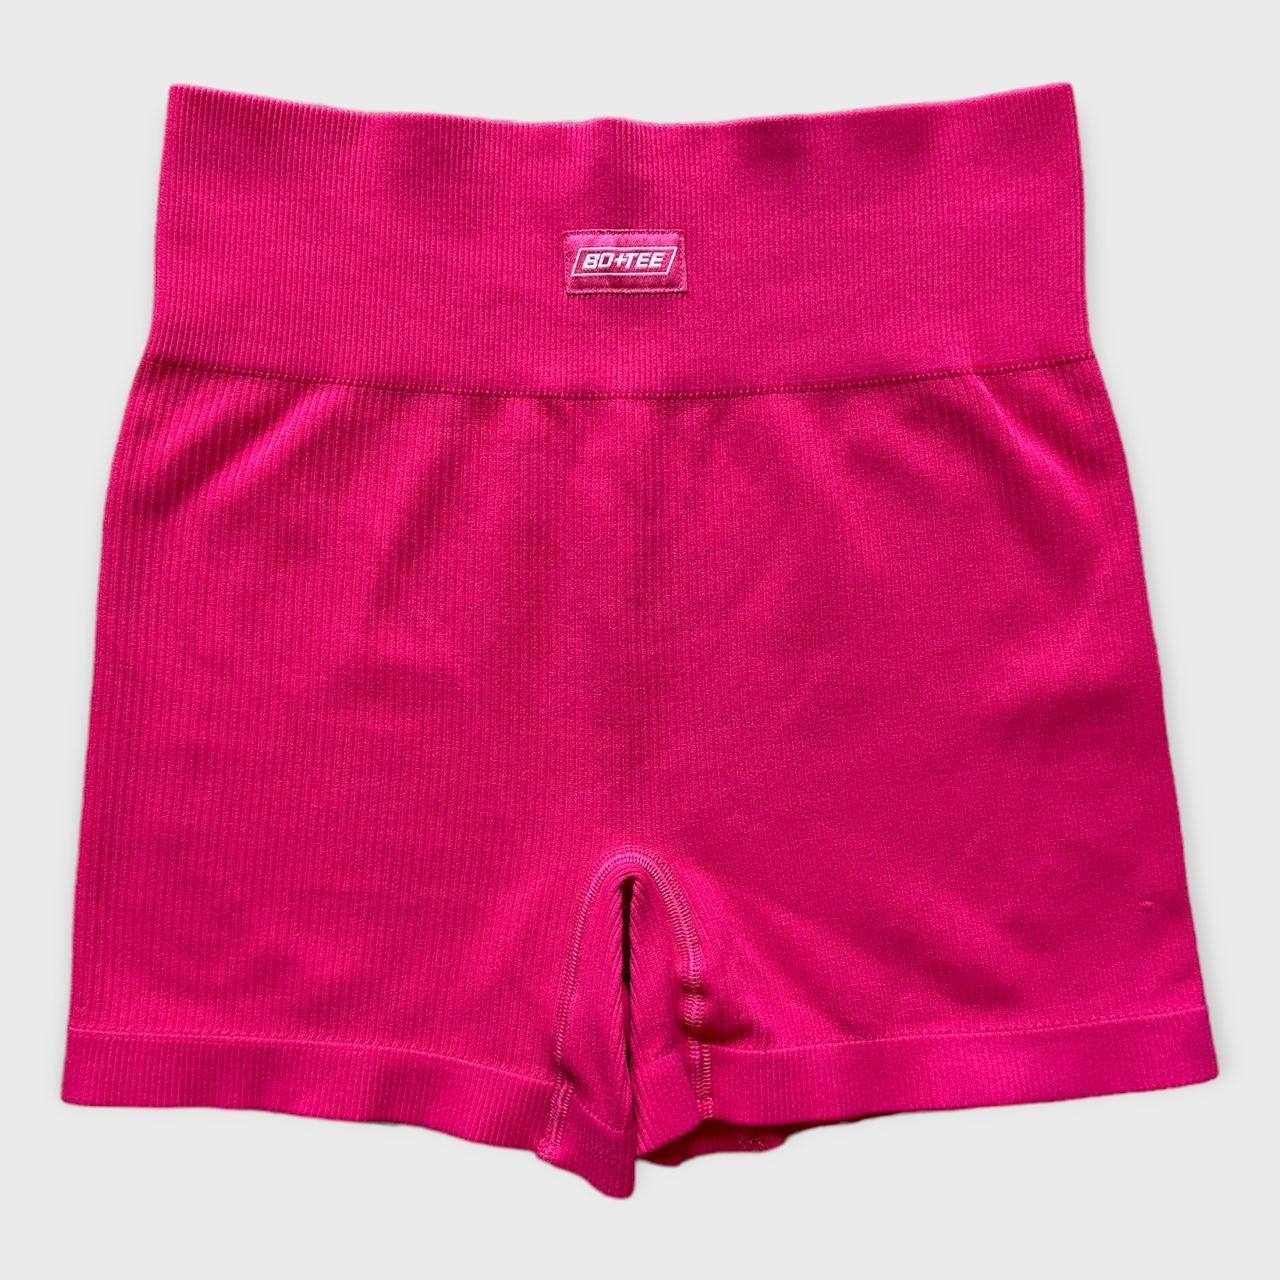 Bo and Tee Hot Pink Workout Shorts Loveee the color - Depop